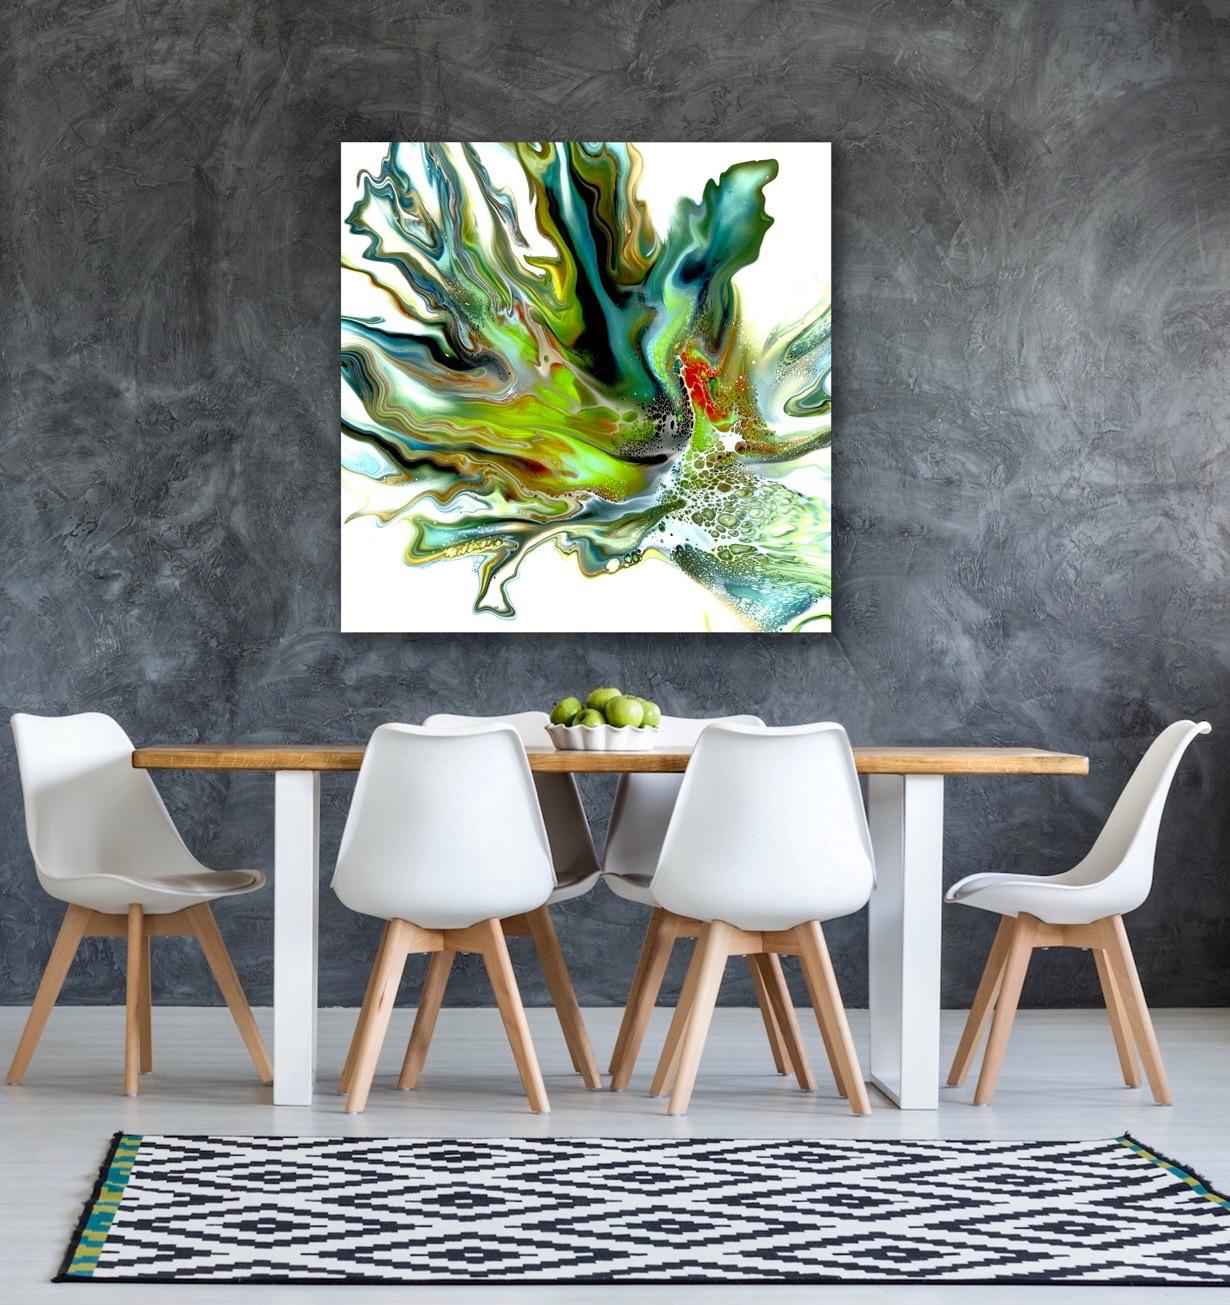 This is a giclee print of an original painting by Celeste Reiter. Printed on lightweight metal composite, your artwork comes ready to hang. This vibrant composition can be hung both indoor and outdoor as it is weather resistant.

This limited